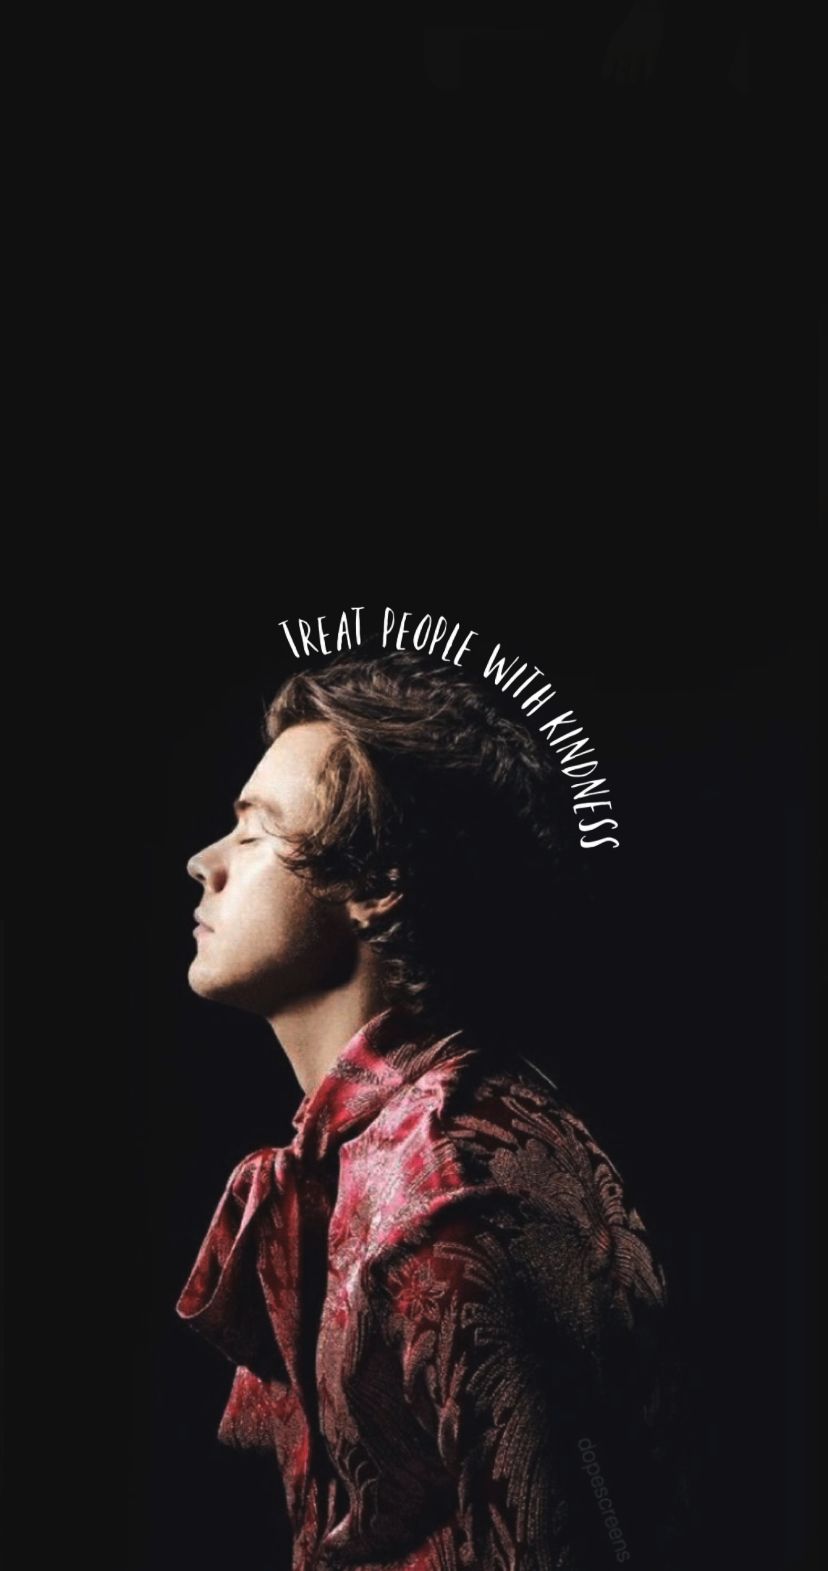 Treat people with kindness wallpaper. Harry styles wallpaper, Harry styles wallpaper iphone, Harry styles picture